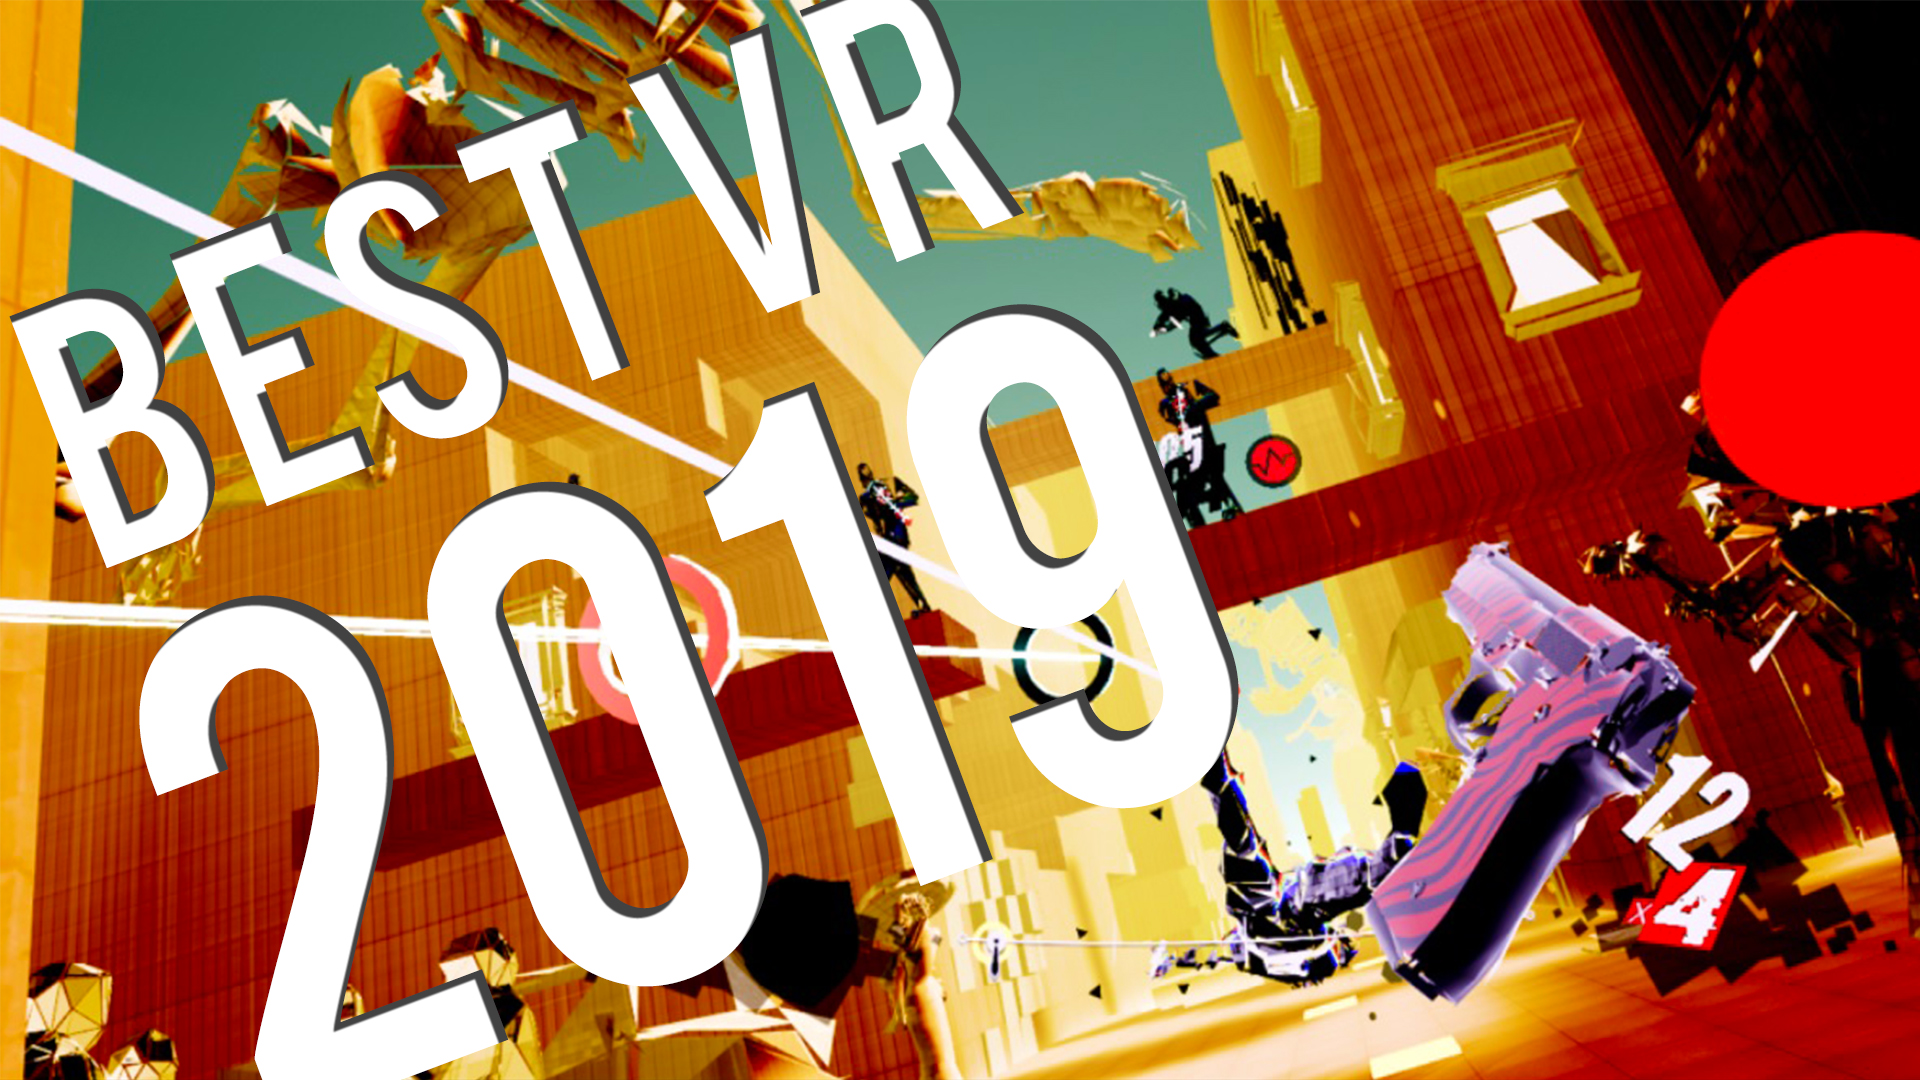 vr games in 2019